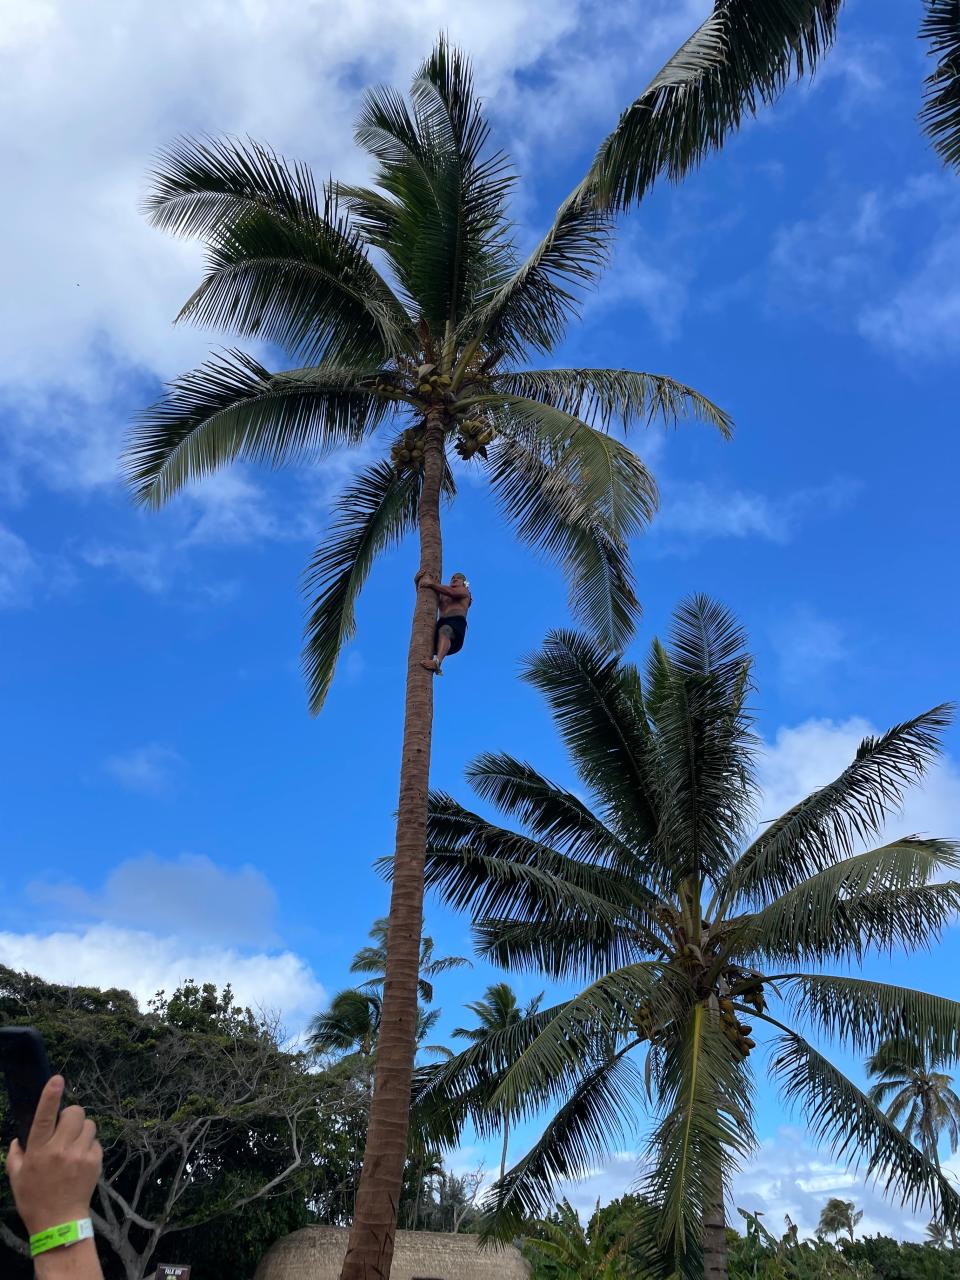 At the Samoan village, workers climb coconut trees without any tools to help them.